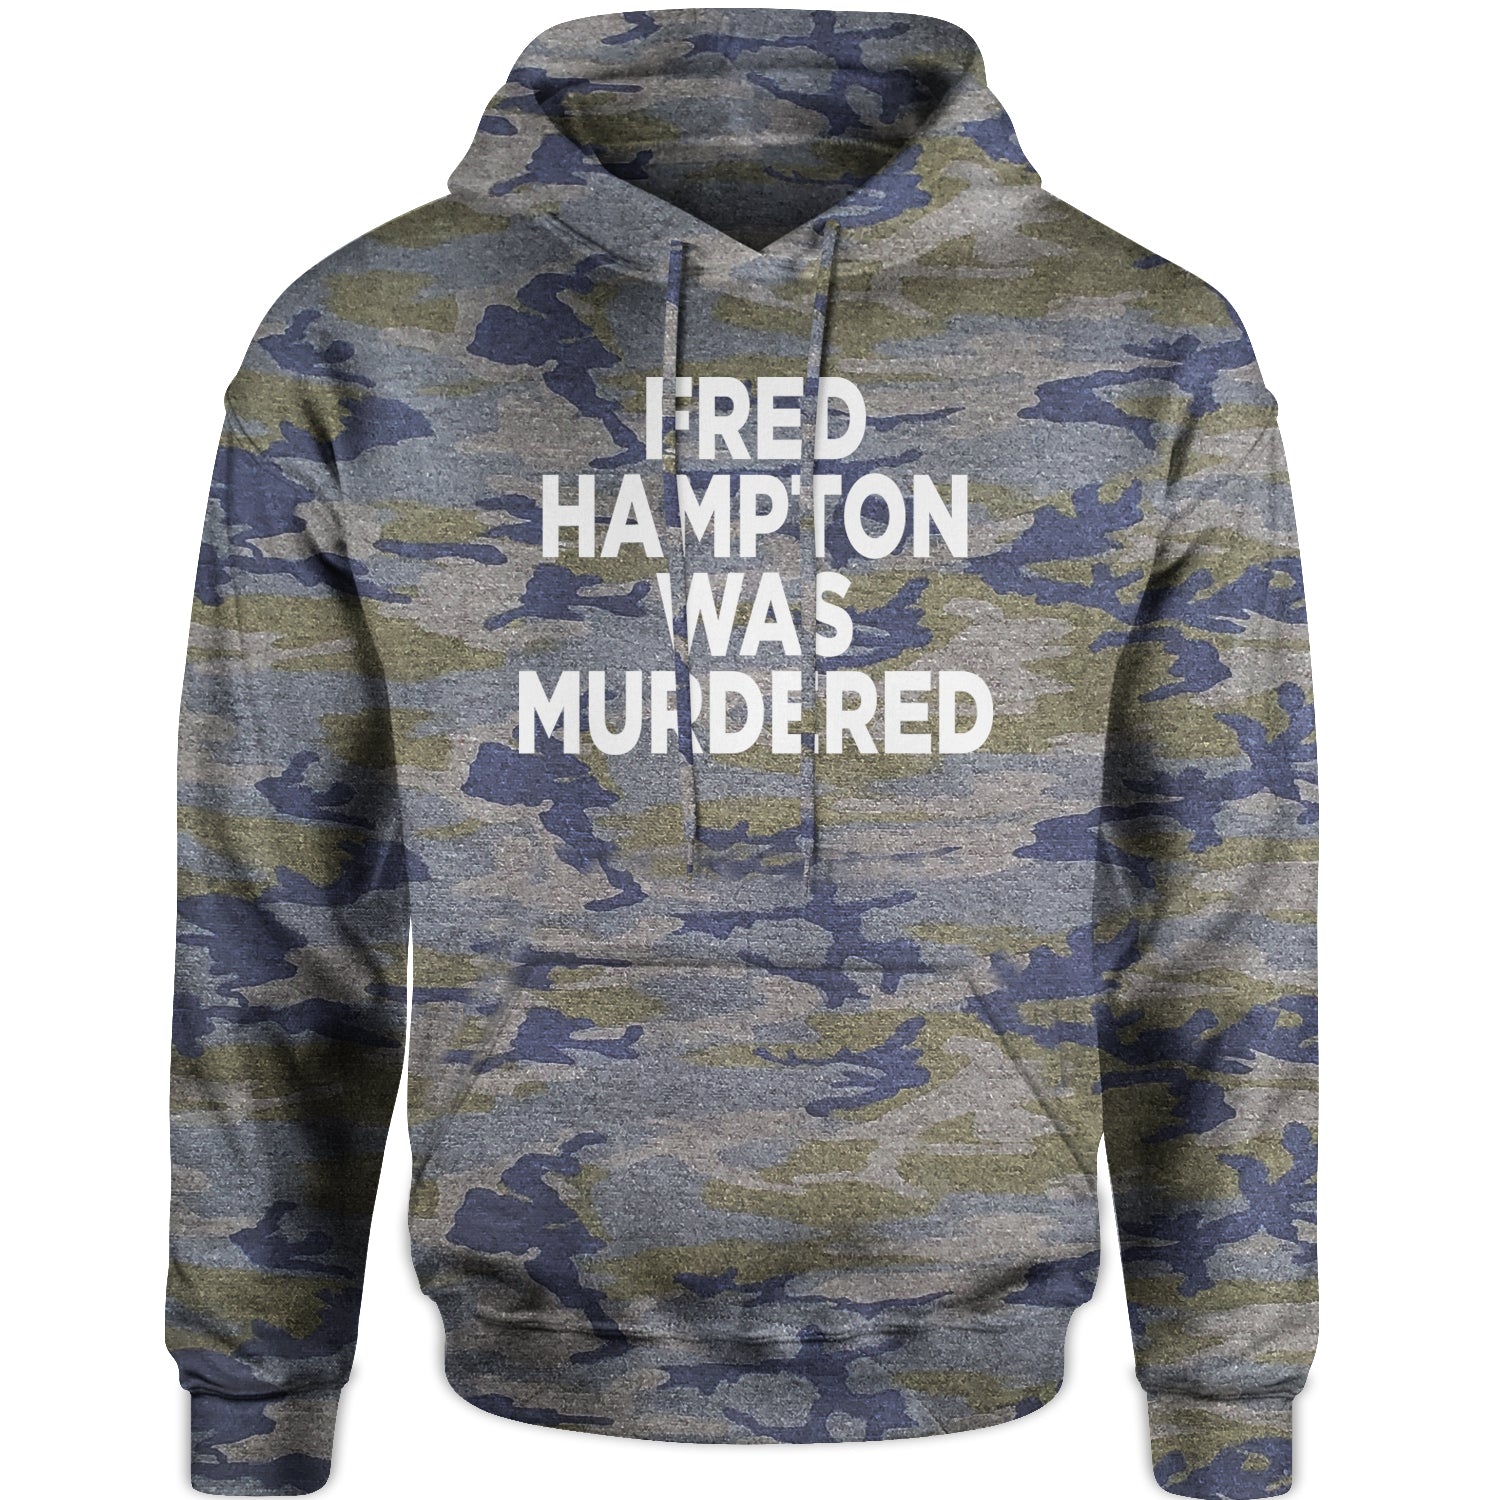 Fred Hampton Was Murdered Adult Hoodie Sweatshirt activism, african, africanamerican, american, black, blm, brutality, eddie, lives, matter, murphy, people, police, you by Expression Tees